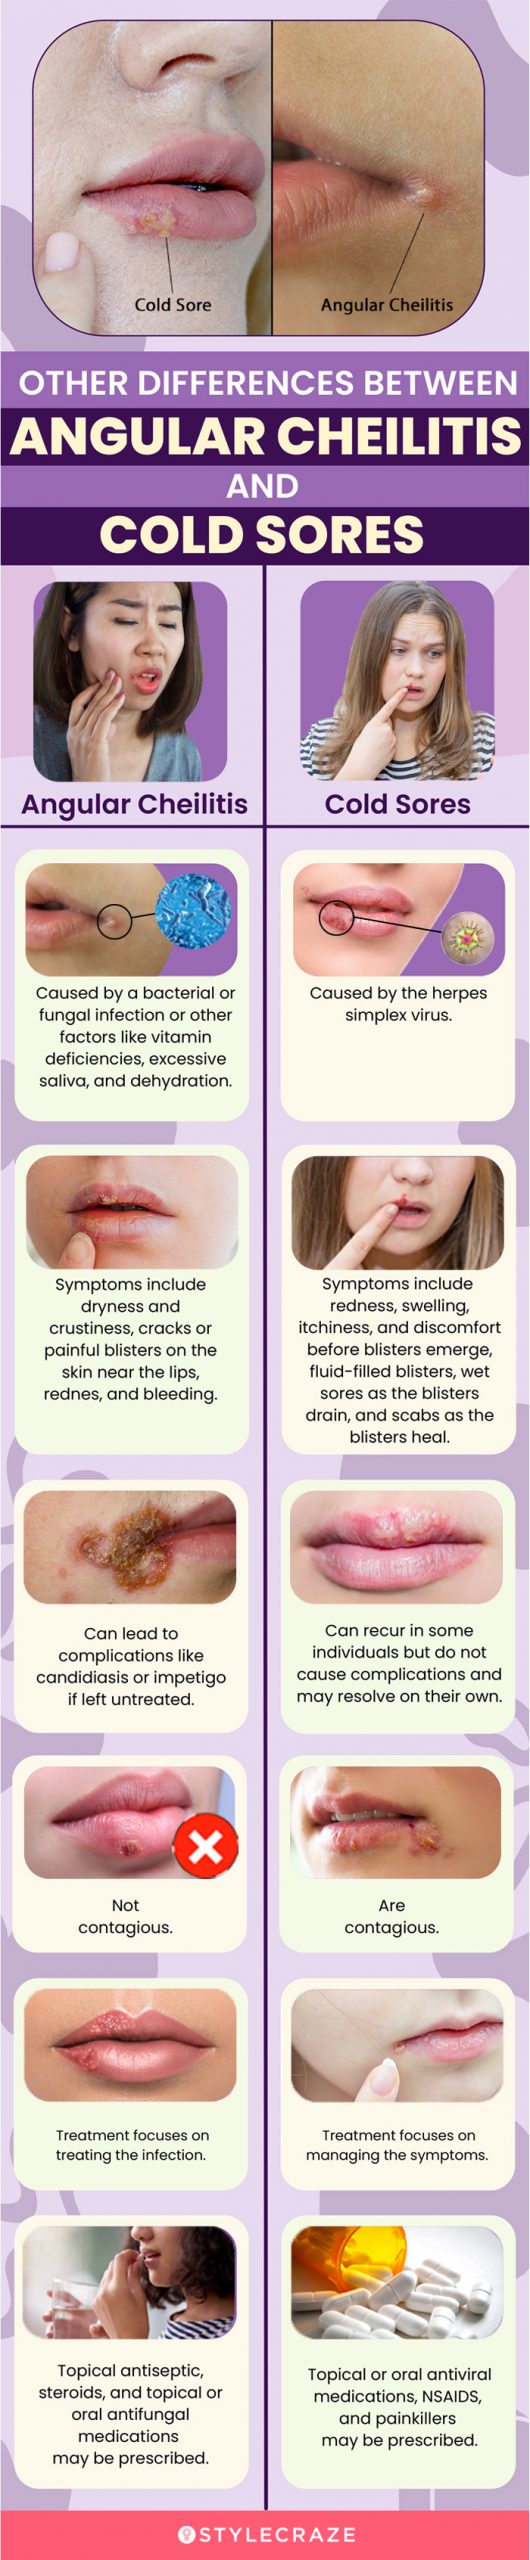 other differences between angular cheilitis and cold sores (infographic)